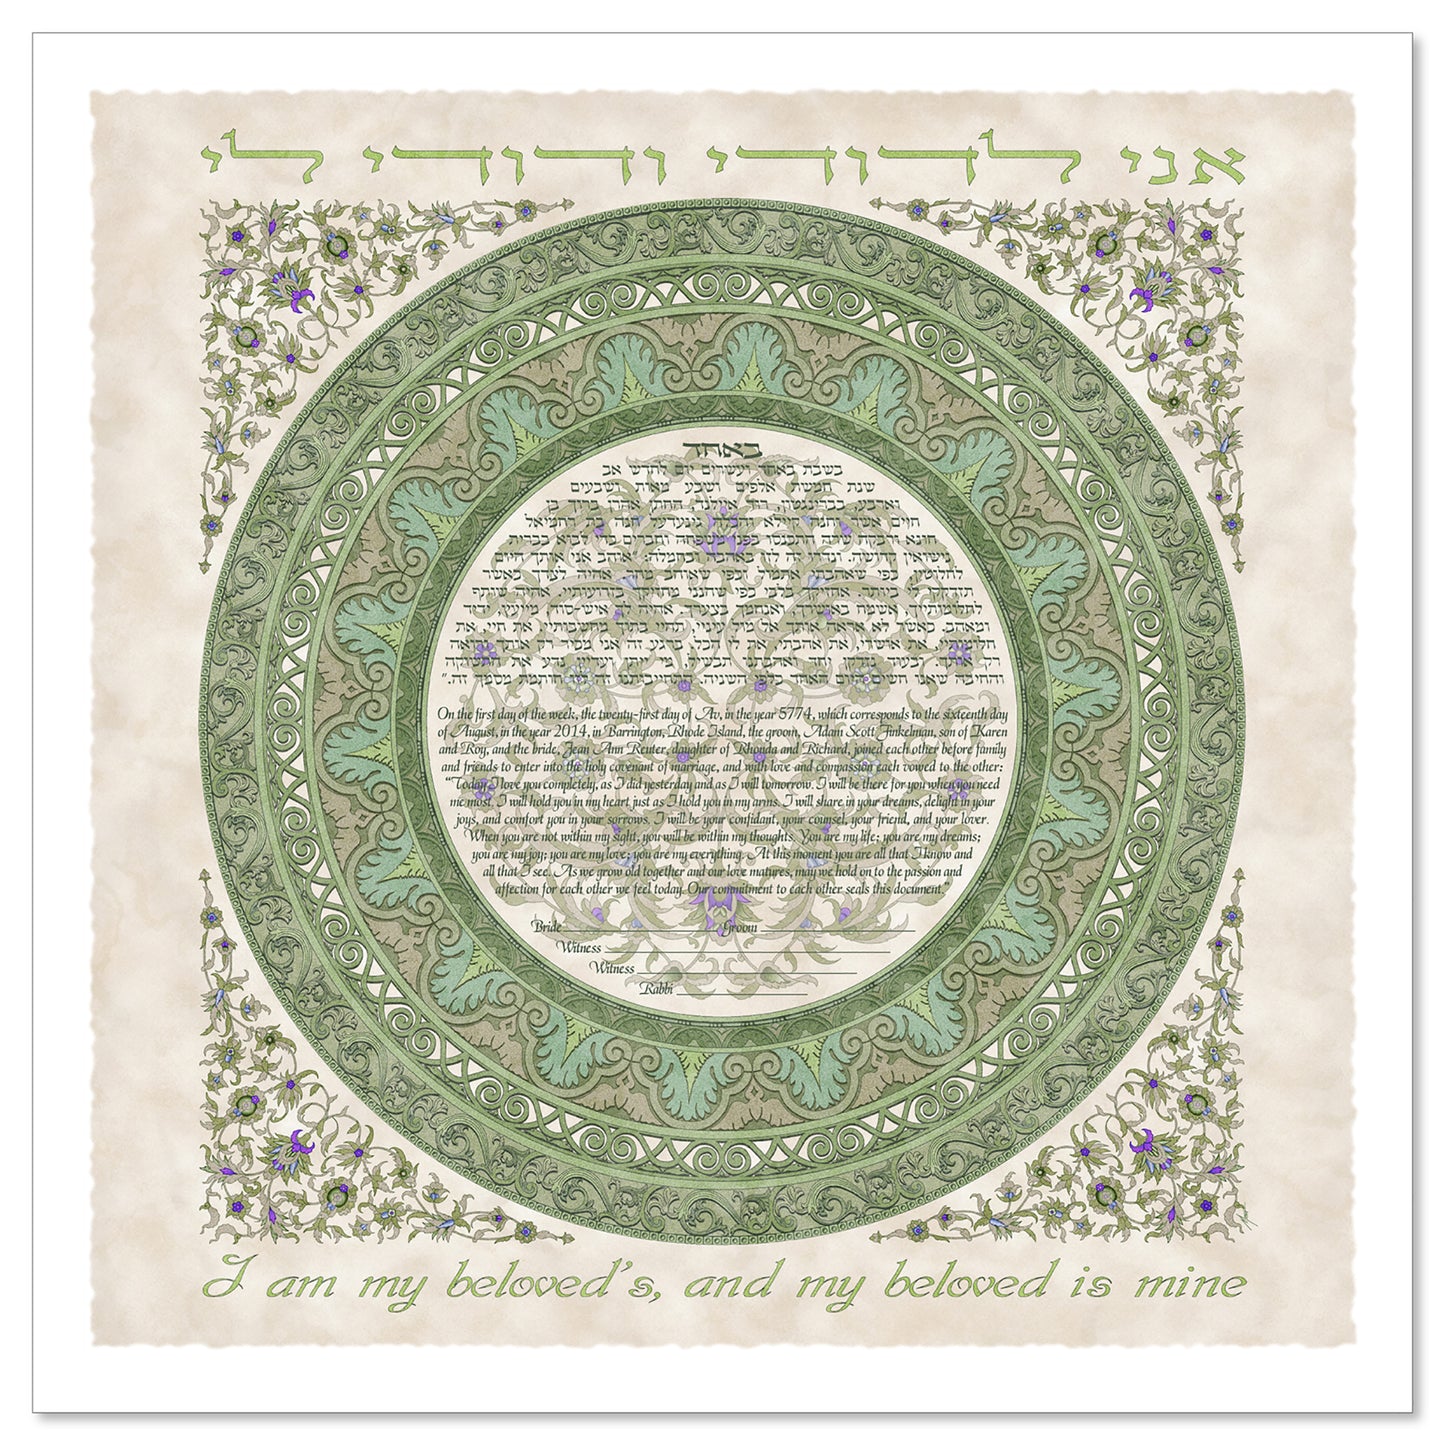 My Love's Ring 3 Green/Parchment ketubah by Micah Parker with the phrase, "I am my beloved's, and my beloved is mine," in Hebrew and English featuring a circular text surrounded by a ring in shades of green on a parchment background.